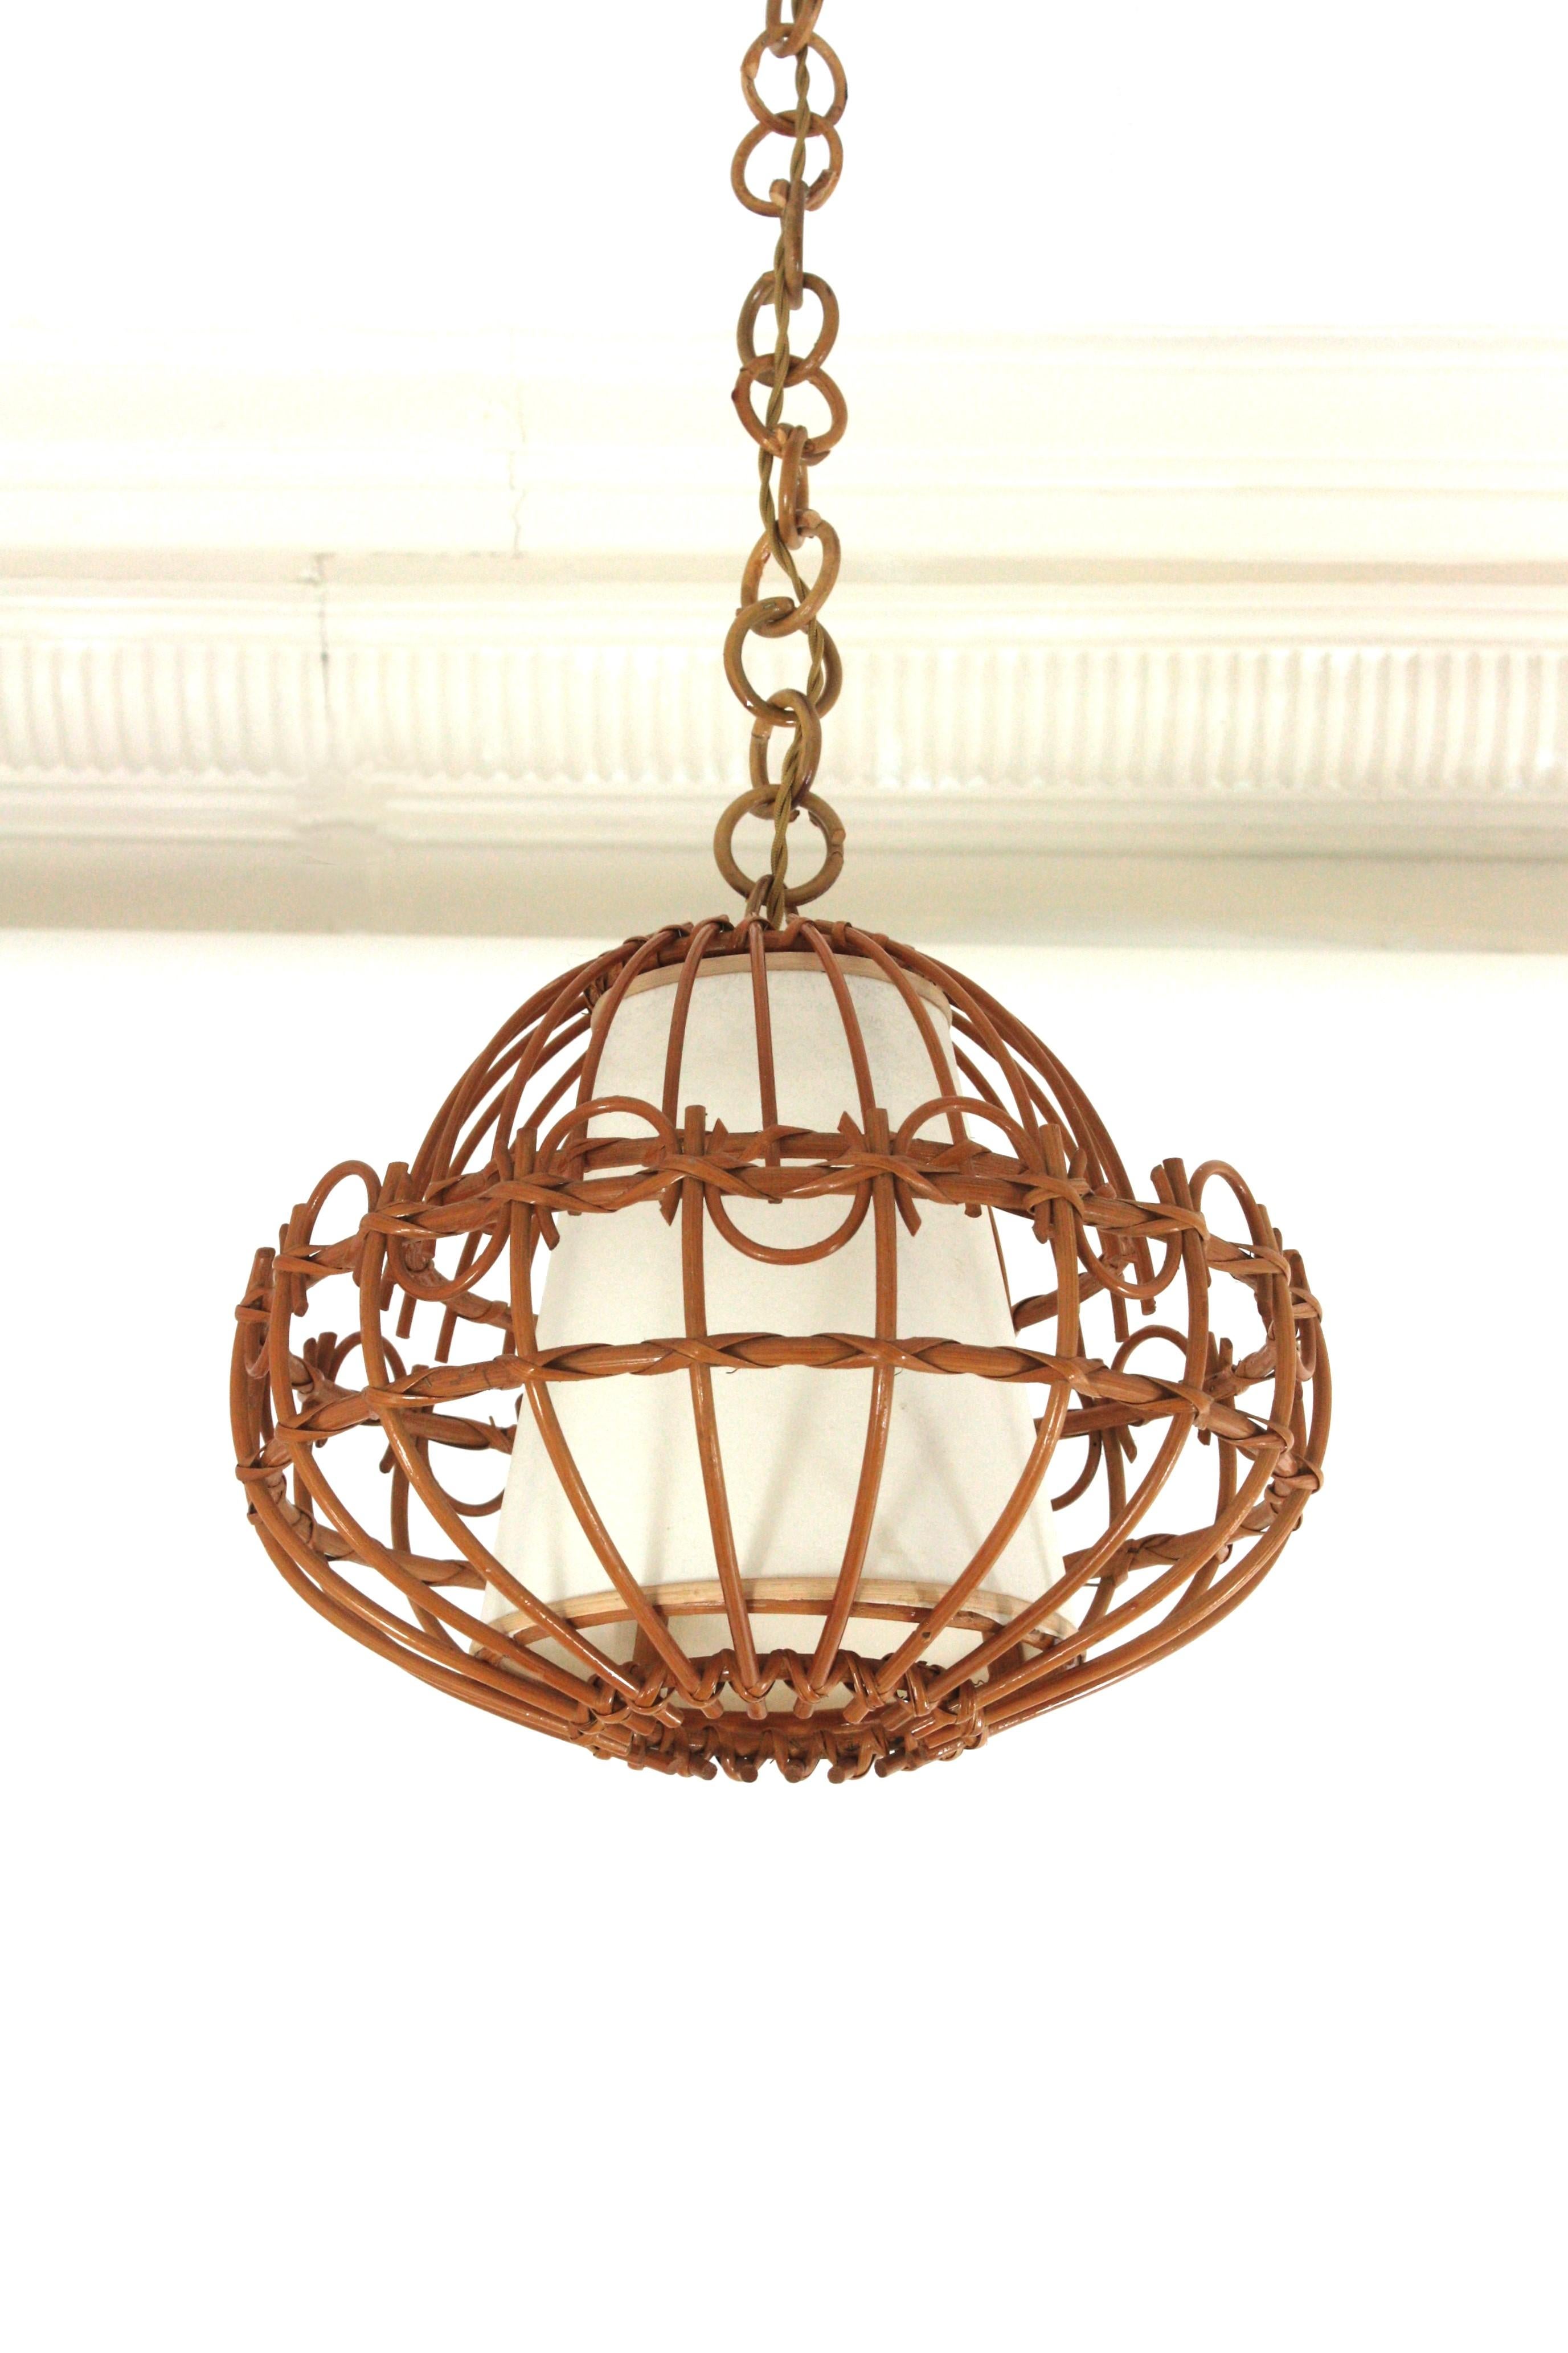 Hand-Crafted Rattan Pendant Hanging Light / Lantern, 1960s  For Sale